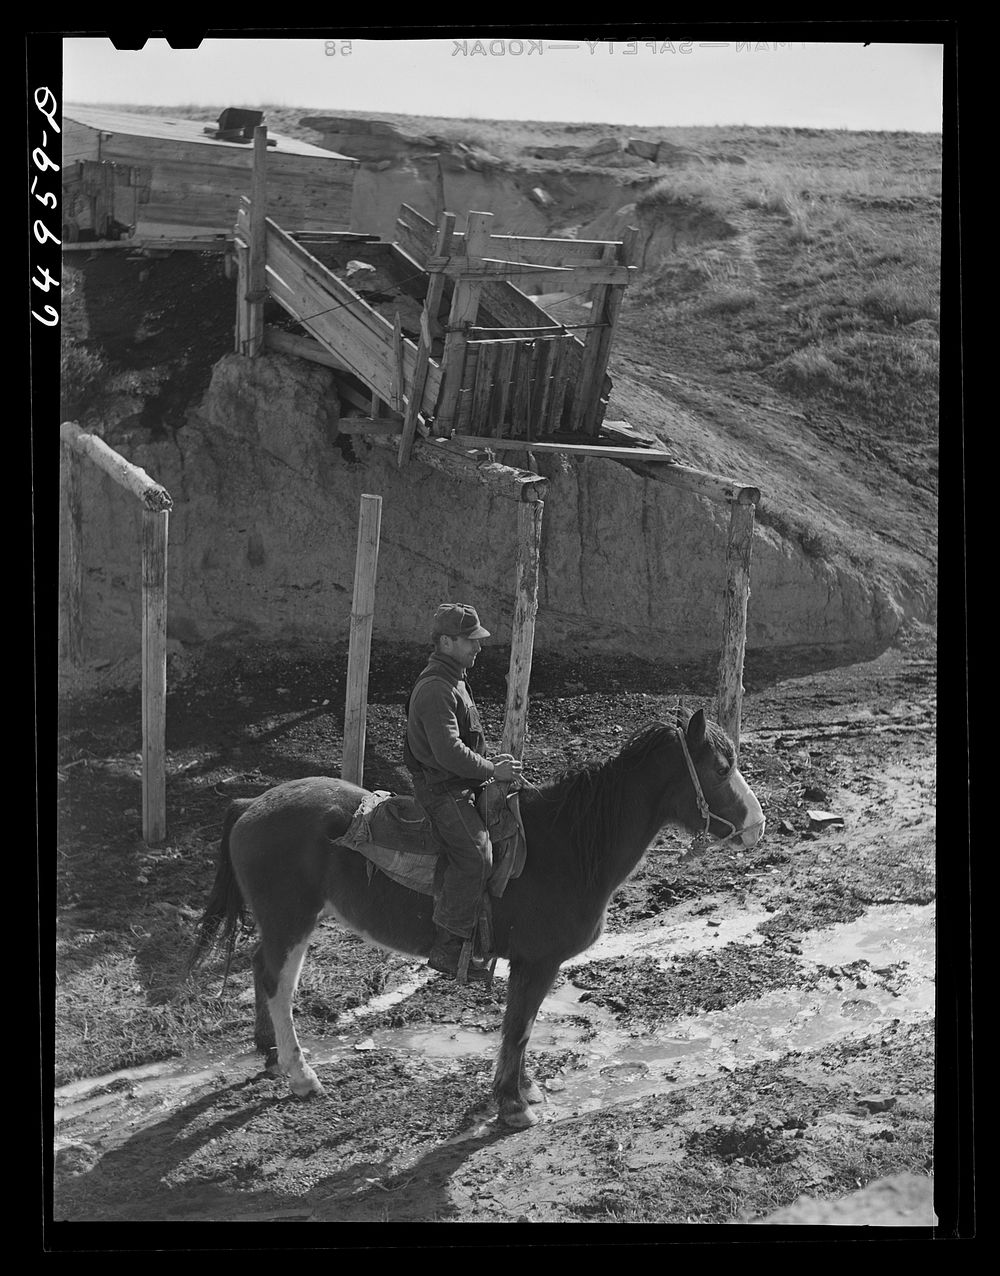 McCone County, Montana. Coal miner who lives in a sheep wagon, and operates this mine on the edge of the badlands for the…